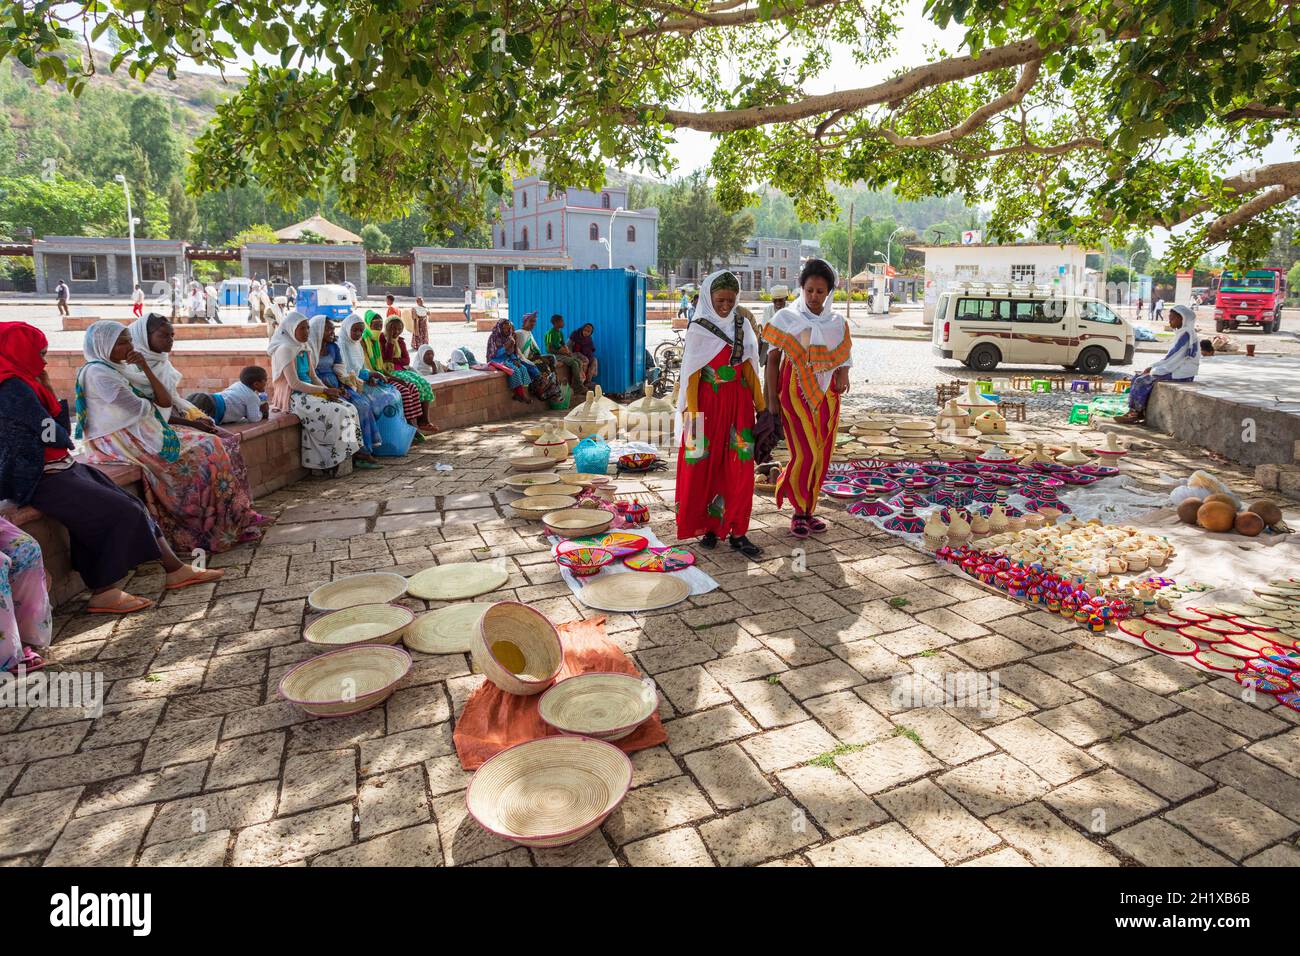 AXUM, ETHIOPIA, APRIL 27th.2019: Carefree tigray native woman resting in street market in center of Aksum on April 27, 2019 in Aksum, Tigray, Ethiopia Stock Photo